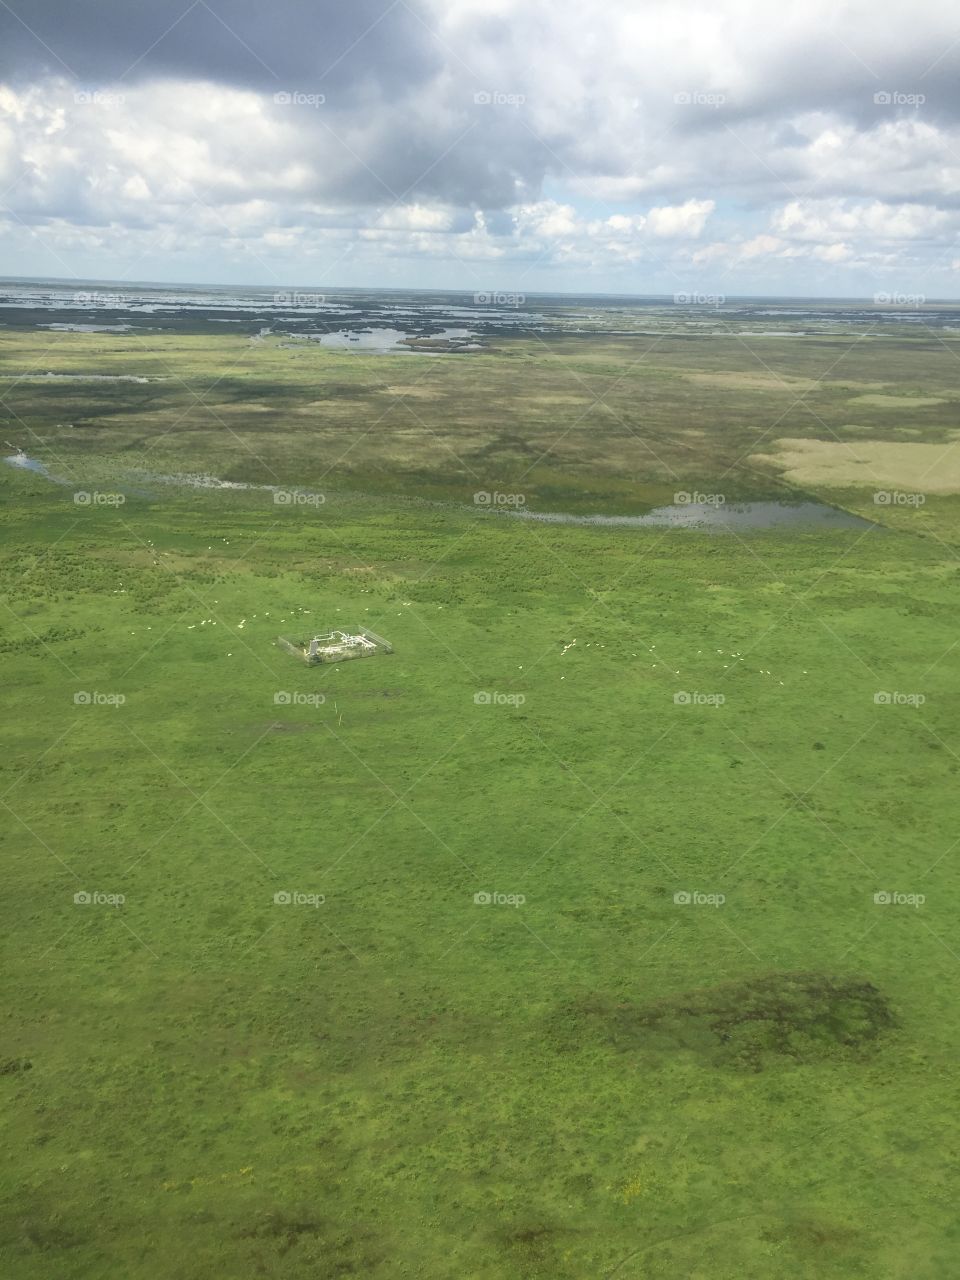 Helicopter view of Louisiana's wetlands near the Gulf of Mexico  